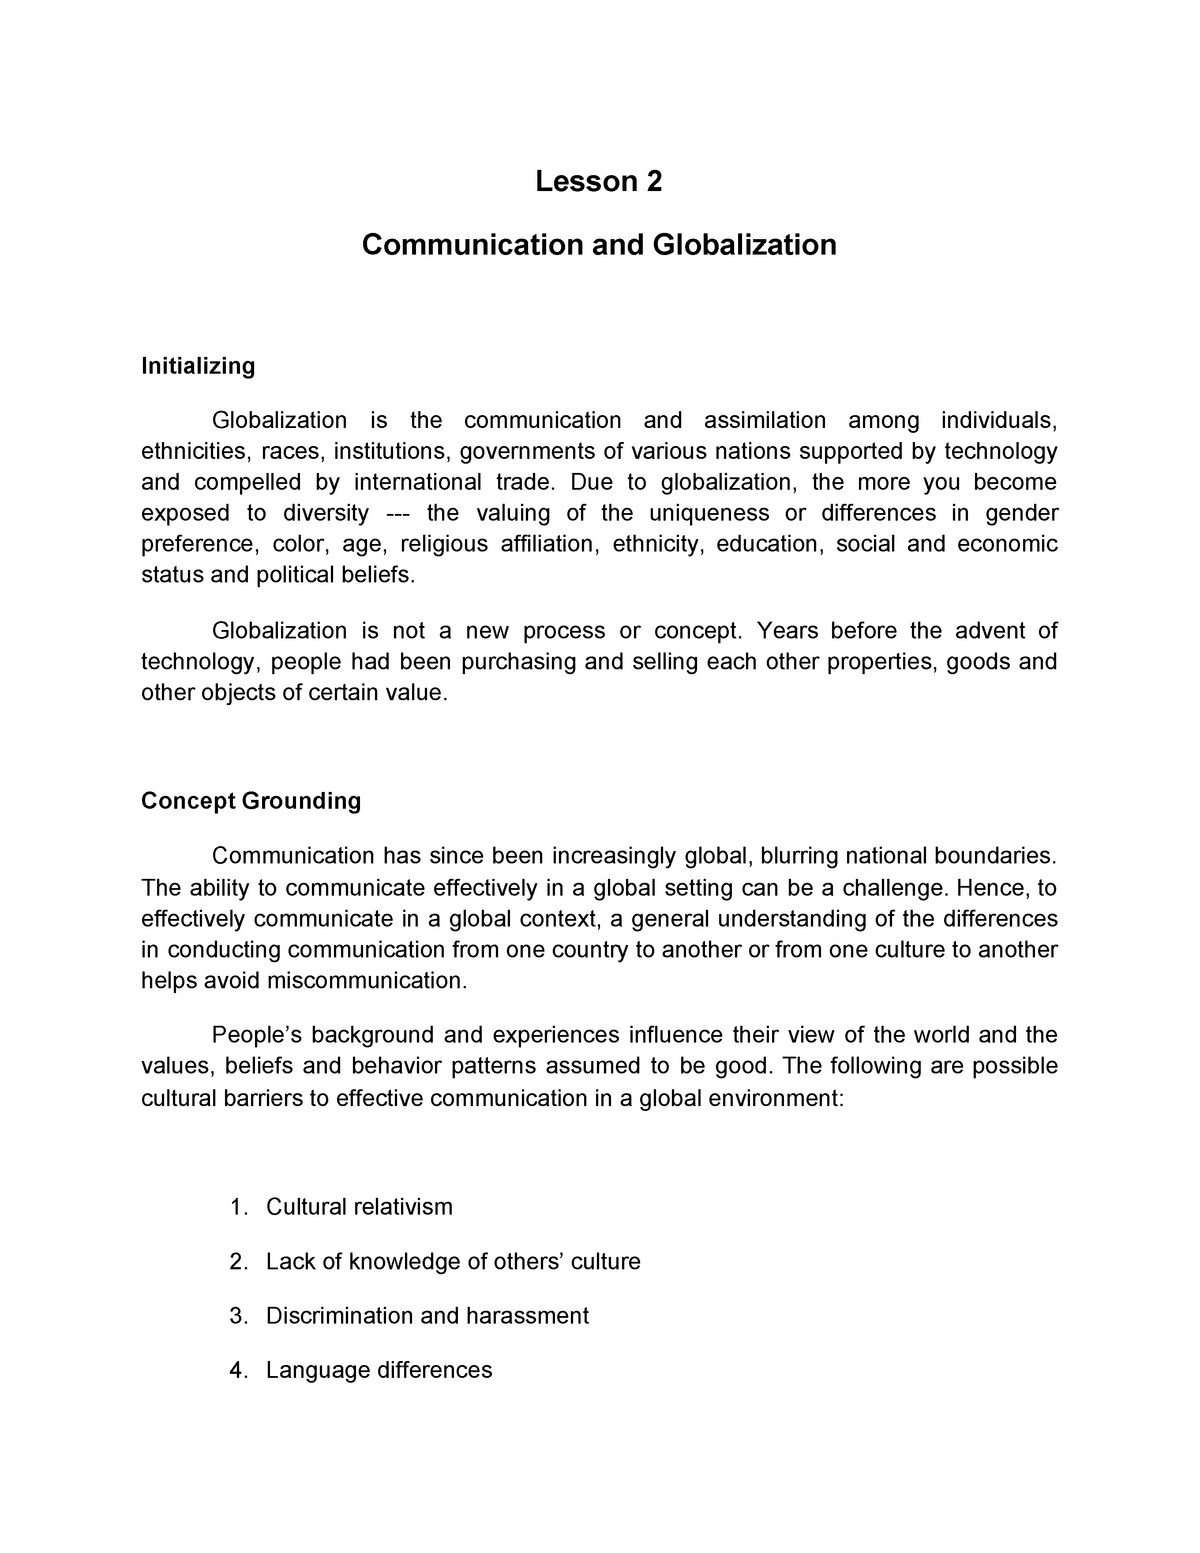 term paper about globalization and communication